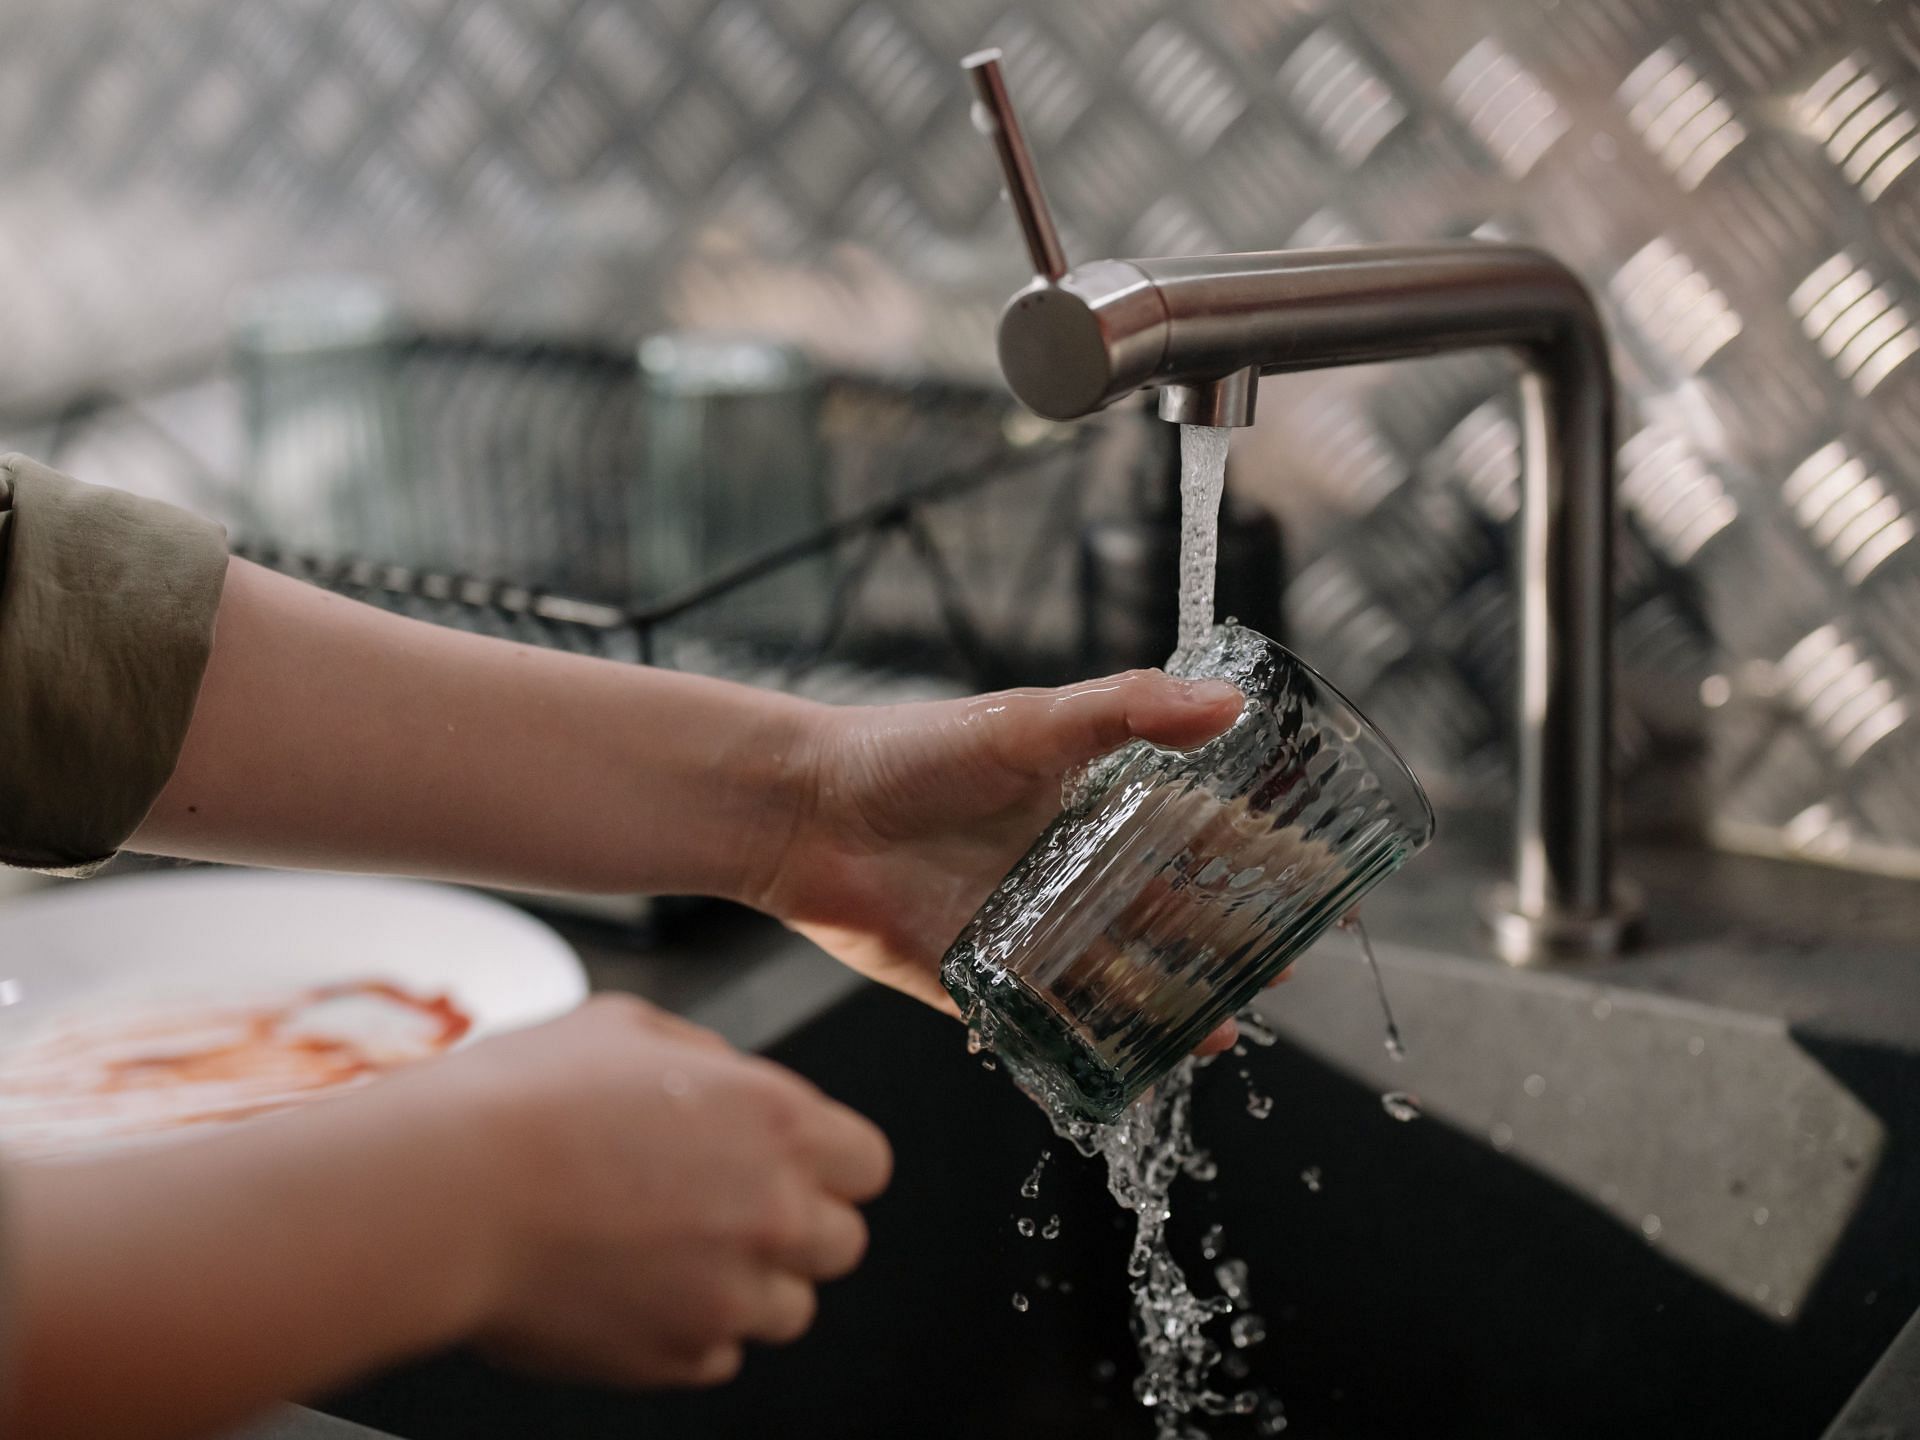 Benefits of wearing gloves while washing dishes (image sourced via Pexels / Photo by Cotton Bro))